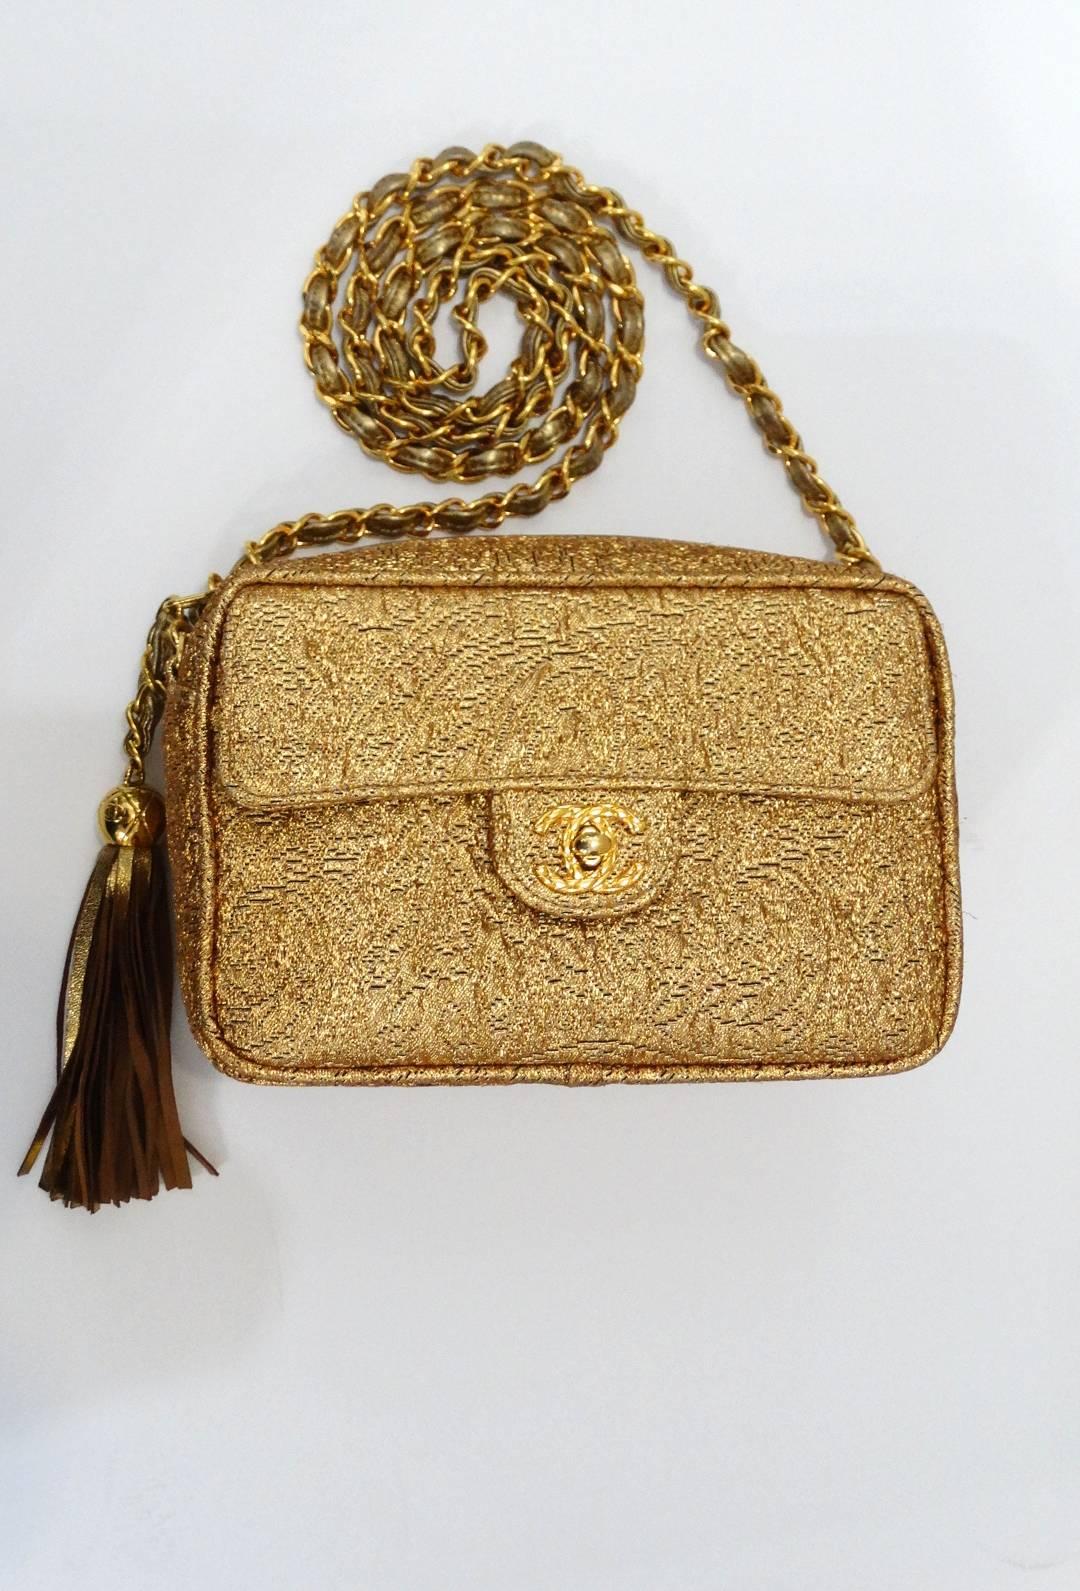 Treat yourself with our gorgeous 1990s Chanel brocade camera bag! Made of a unique embossed gold leather in an intricate brocade pattern. This bag has the classic gold metal chain with leather woven throughout. Zips across the top with long CC